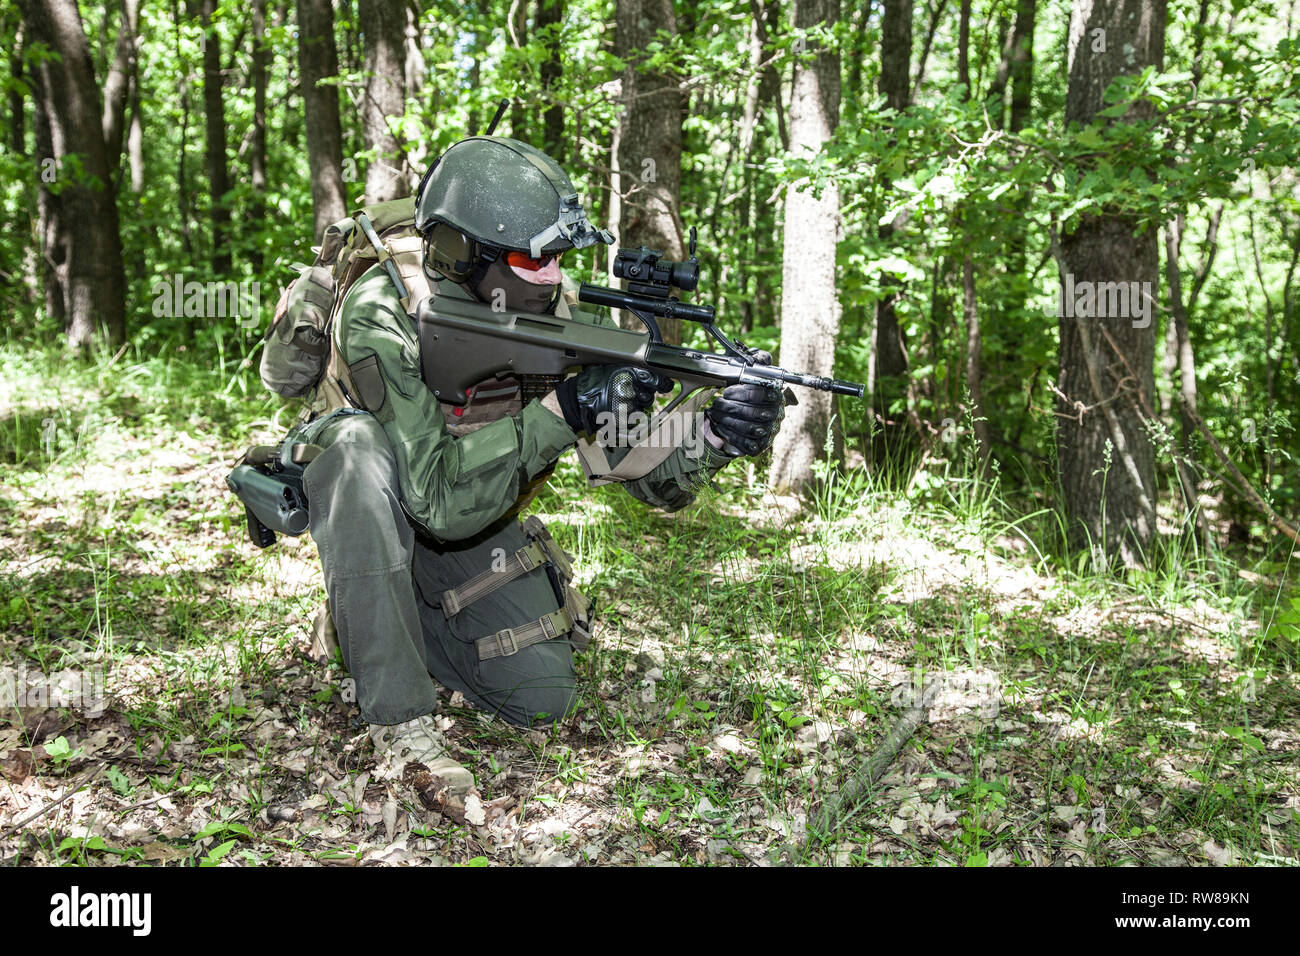 Jagdkommando soldier of the Austrian special forces equipped with rifle. Stock Photo